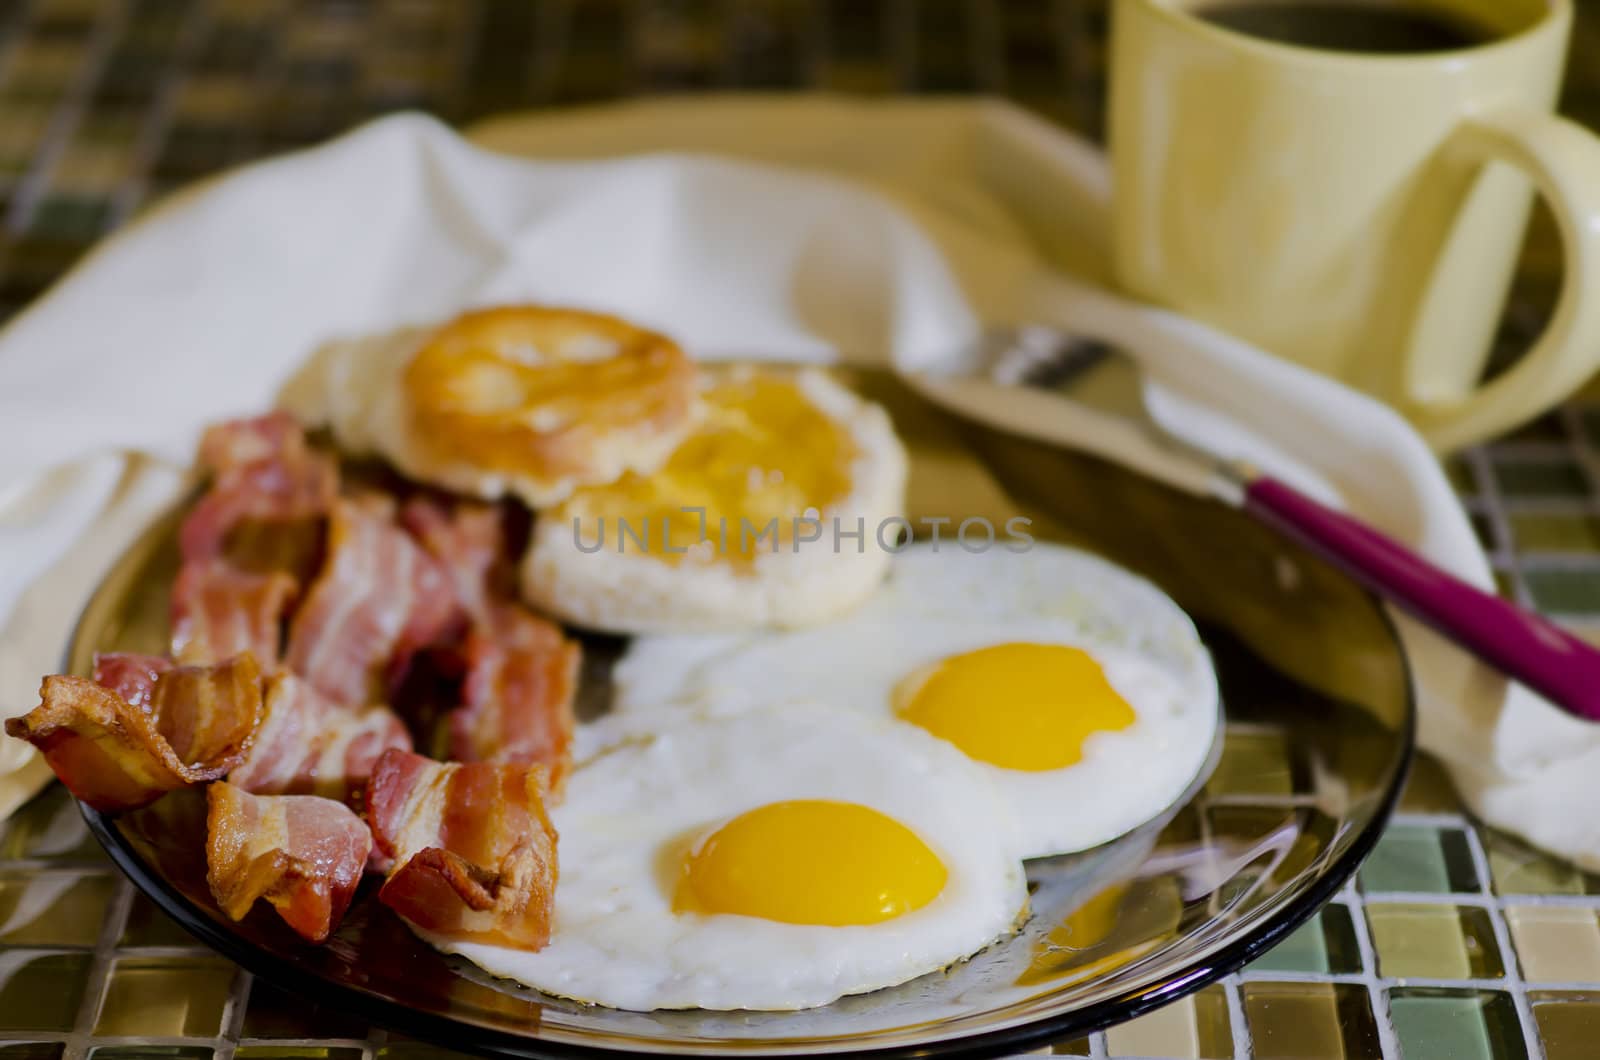 Breakfast plate  with eggs, bacon, coffee, and biscuits with apple jelly.